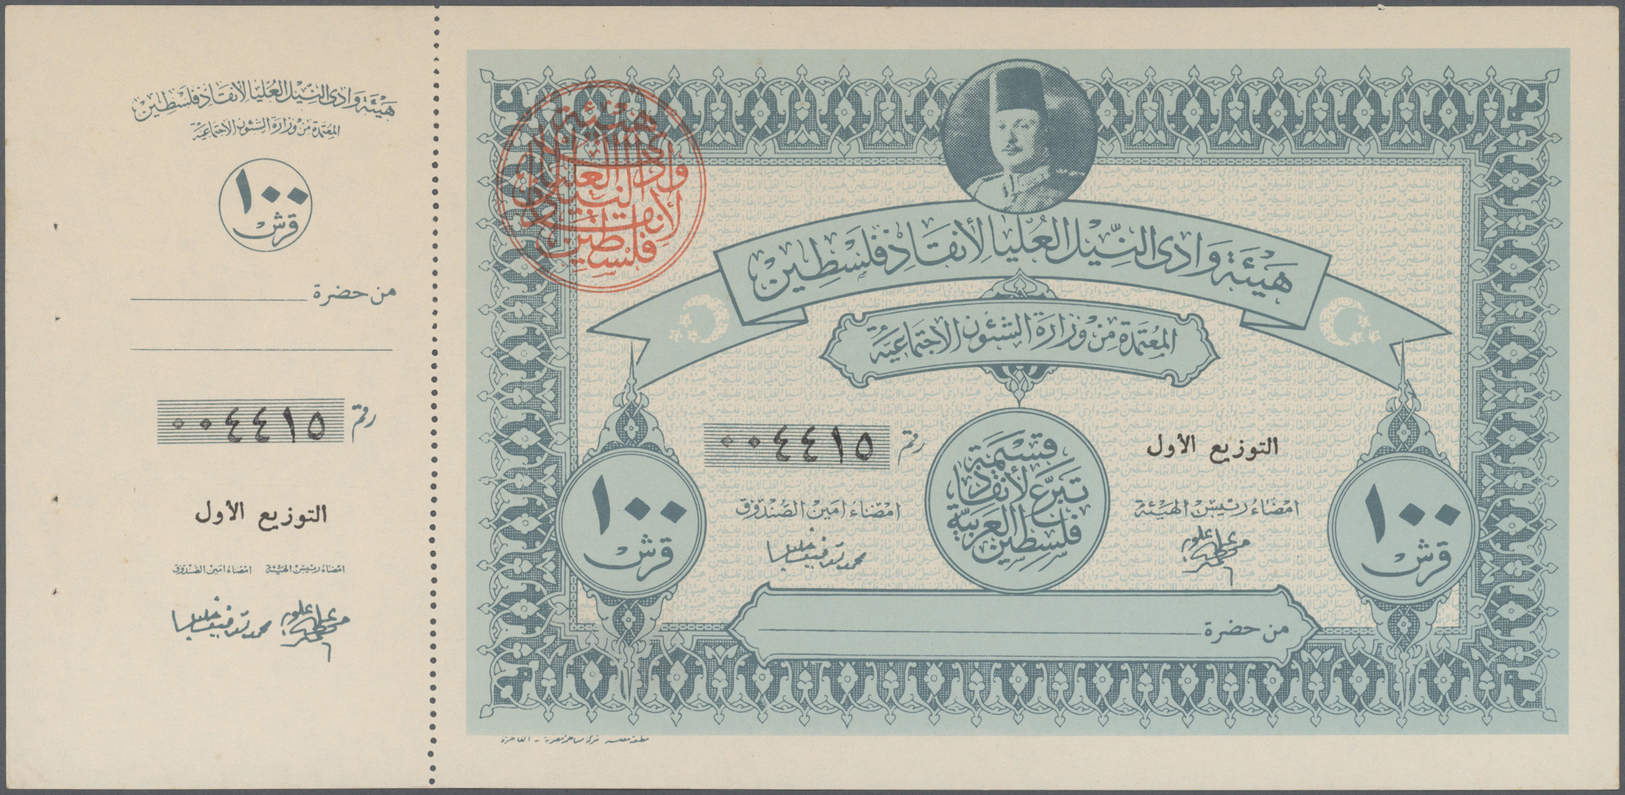 00701 Egypt / Ägypten: Set Of 6 Warfund Notes 5, 10, 2x 50 And 2x 100 Pounds ND, All With Counterfoil At Left And Some P - Egypt